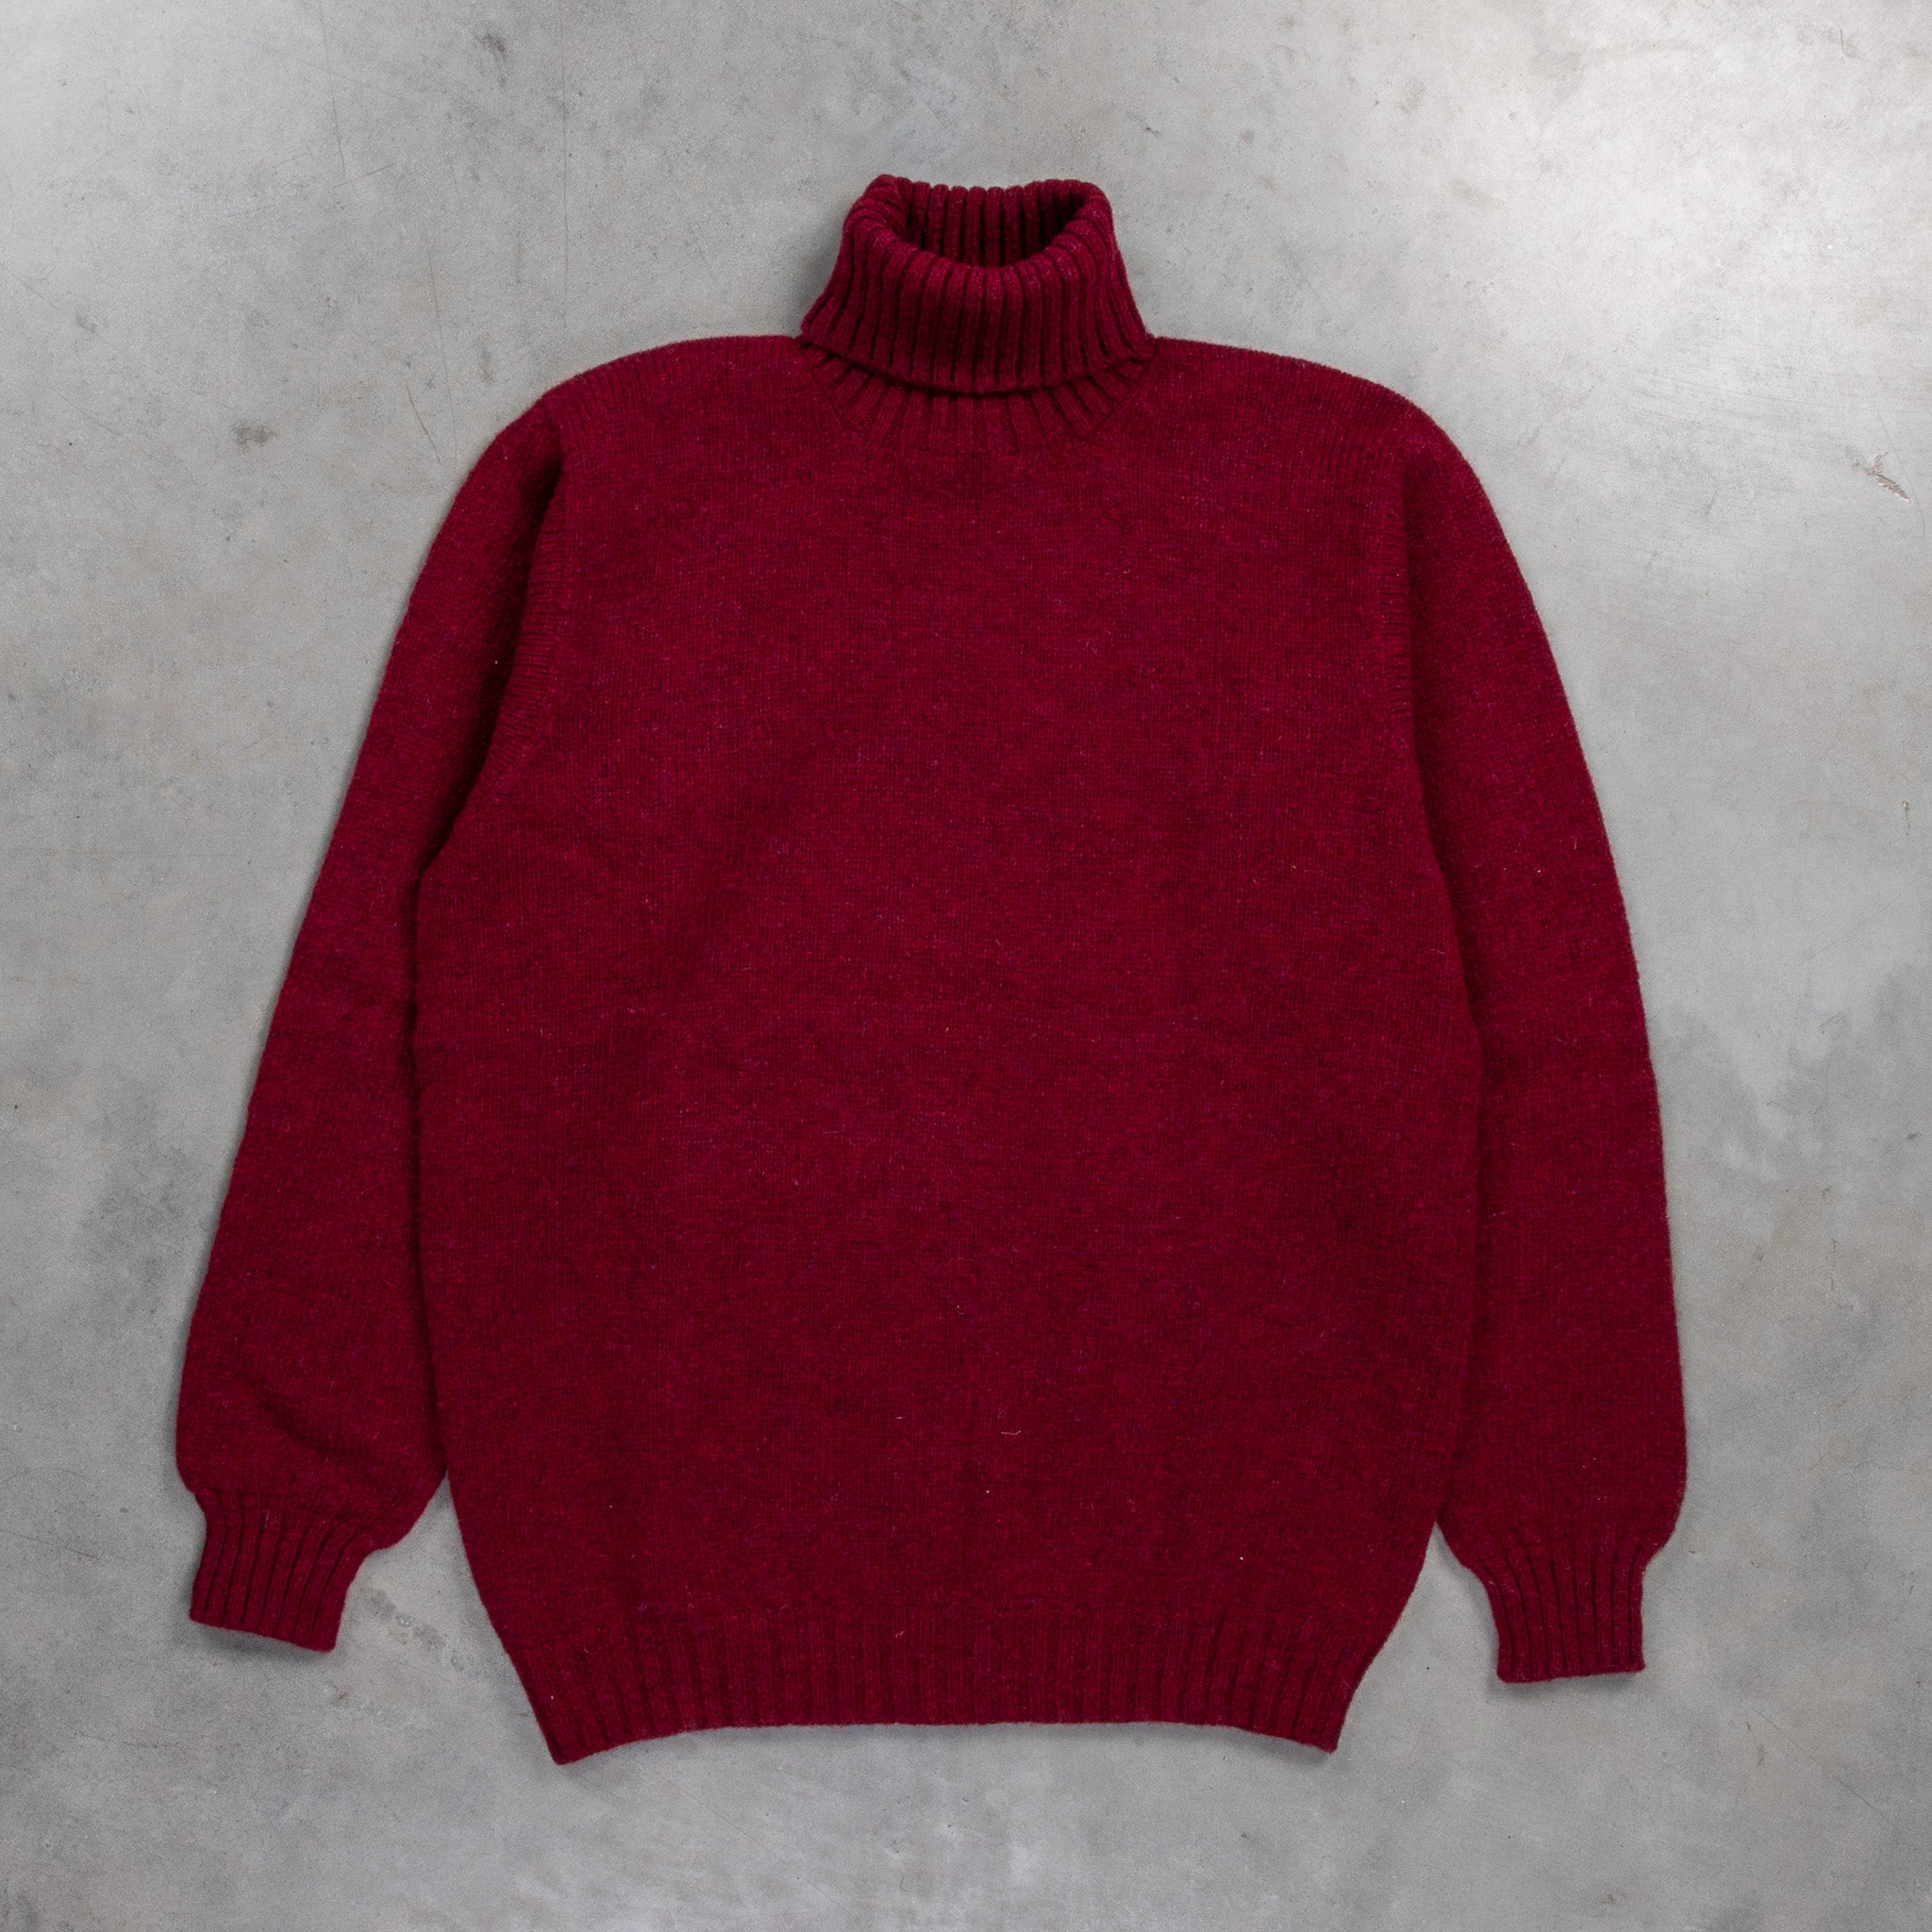 Laurence J. Smith Super Soft Seamless Roll Neck Pullover Bord Mix